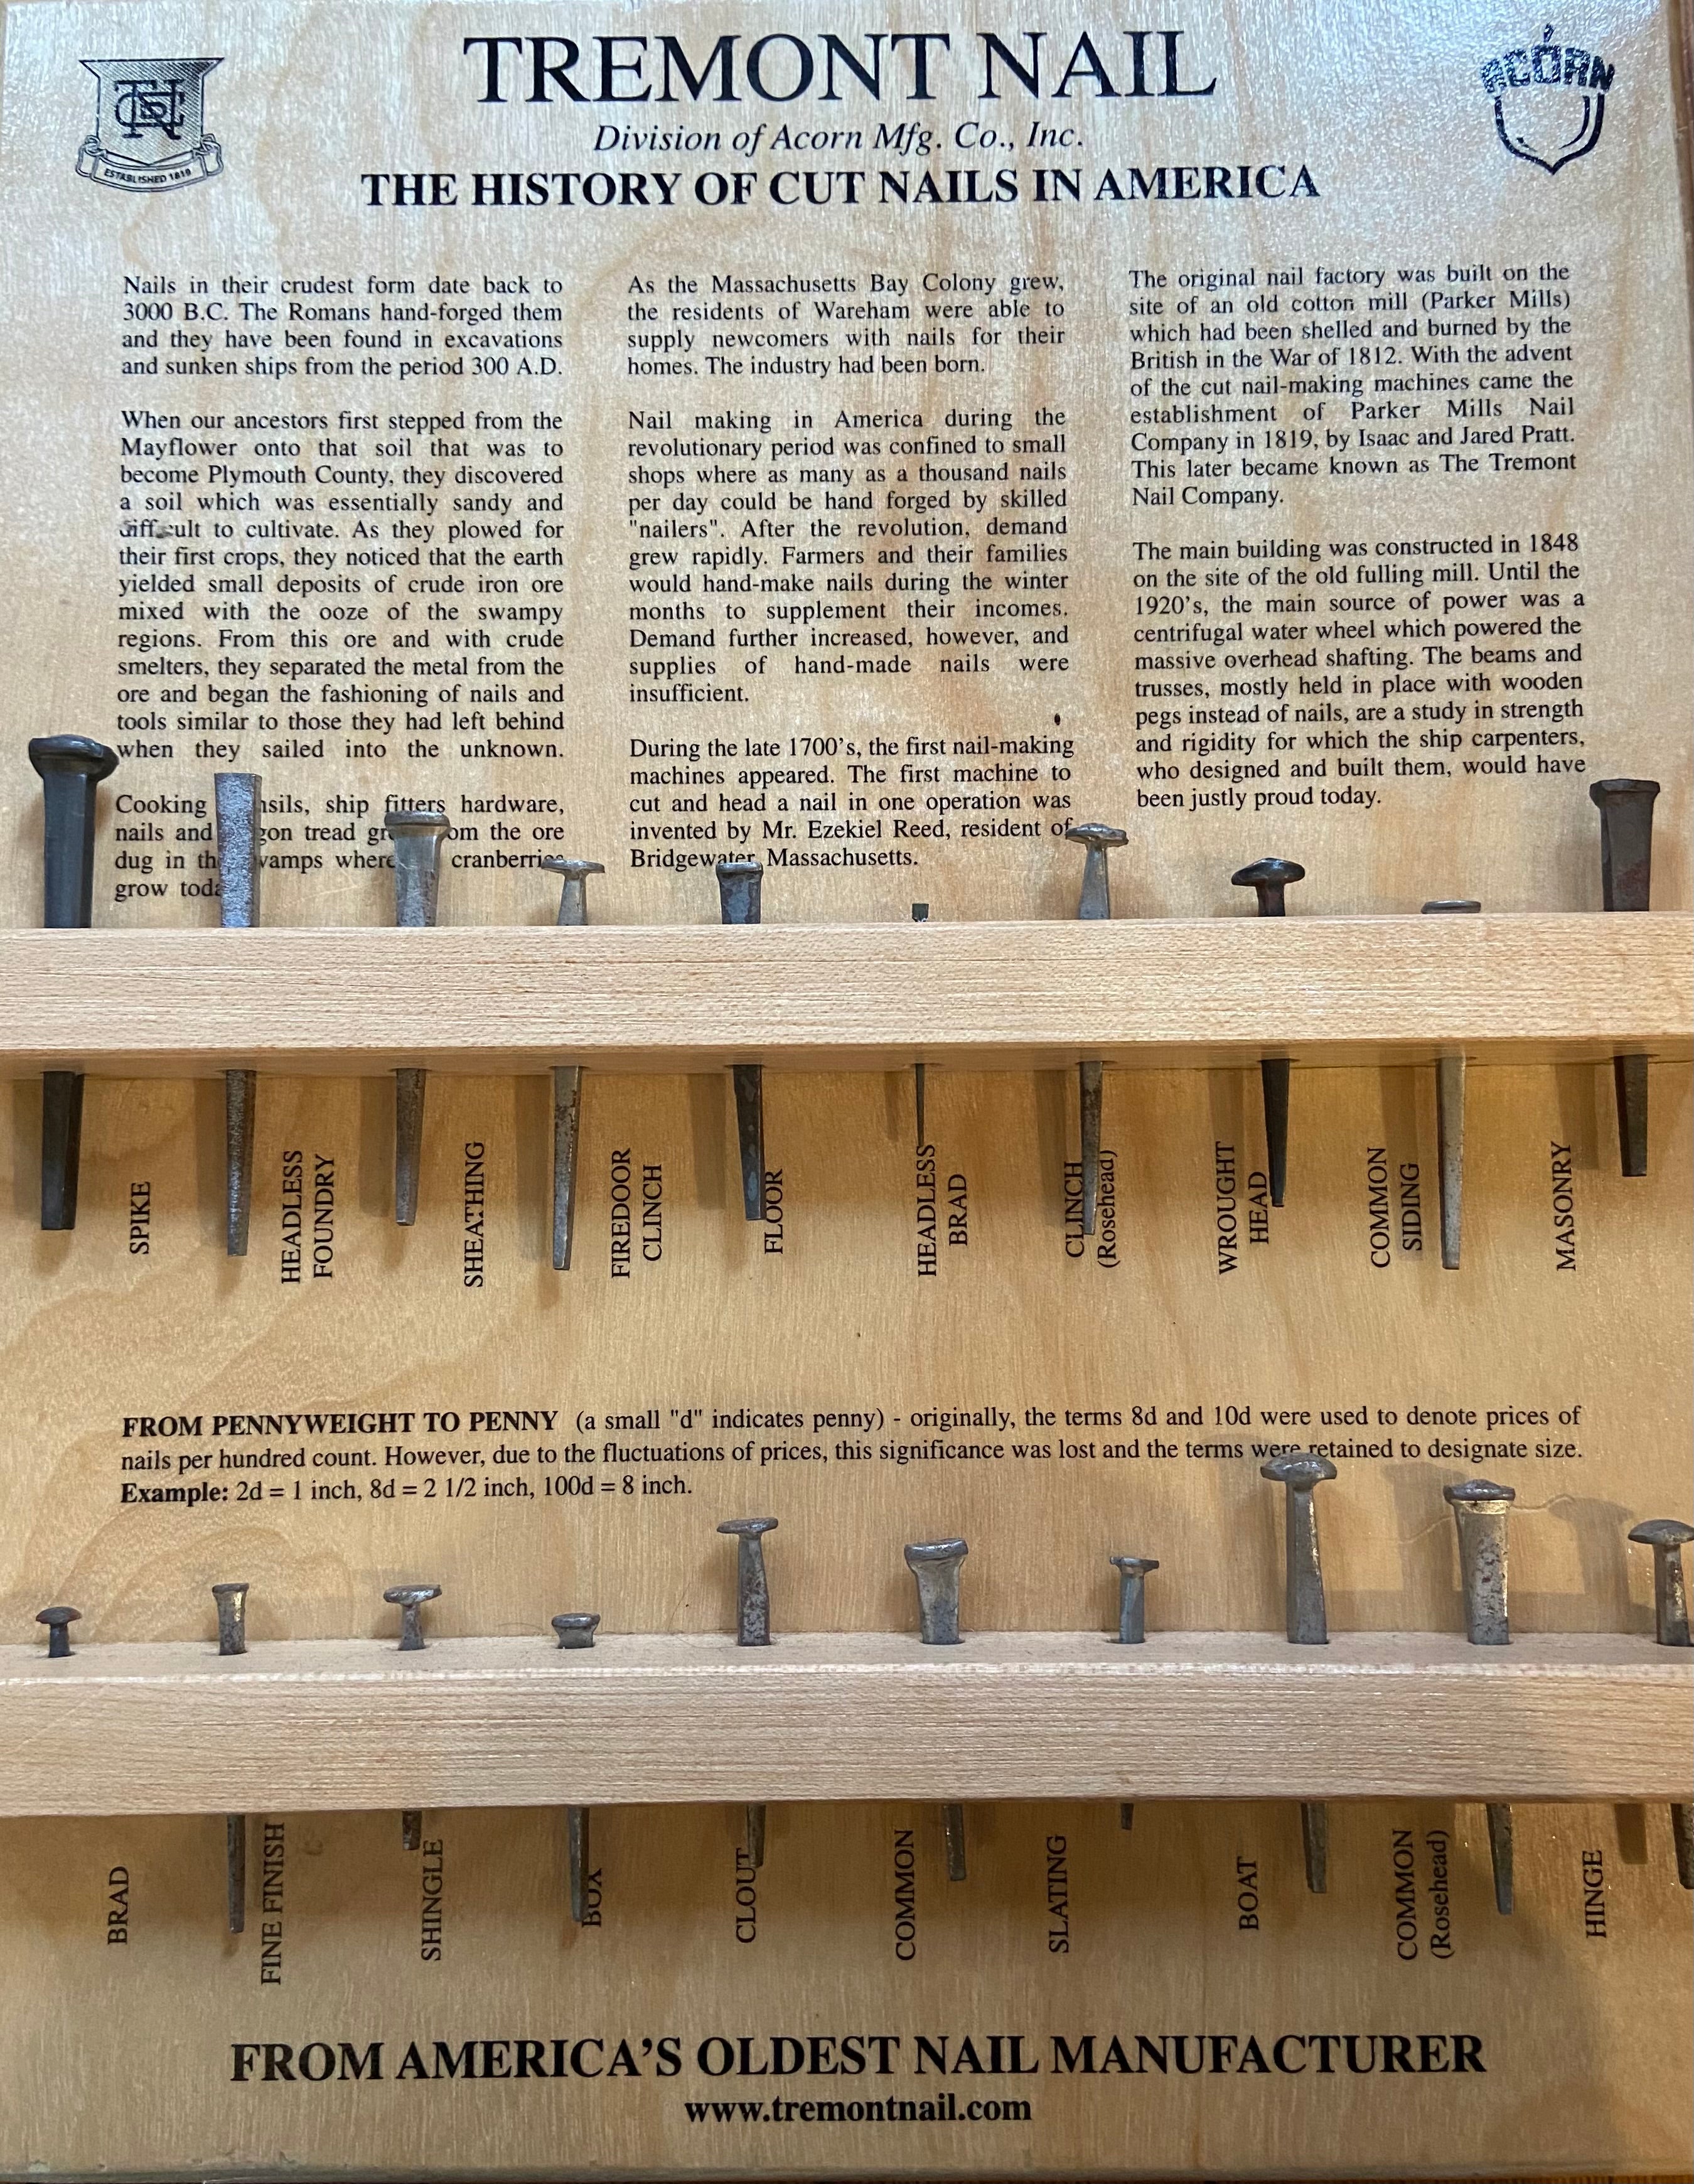 The History of Cut Nails in America